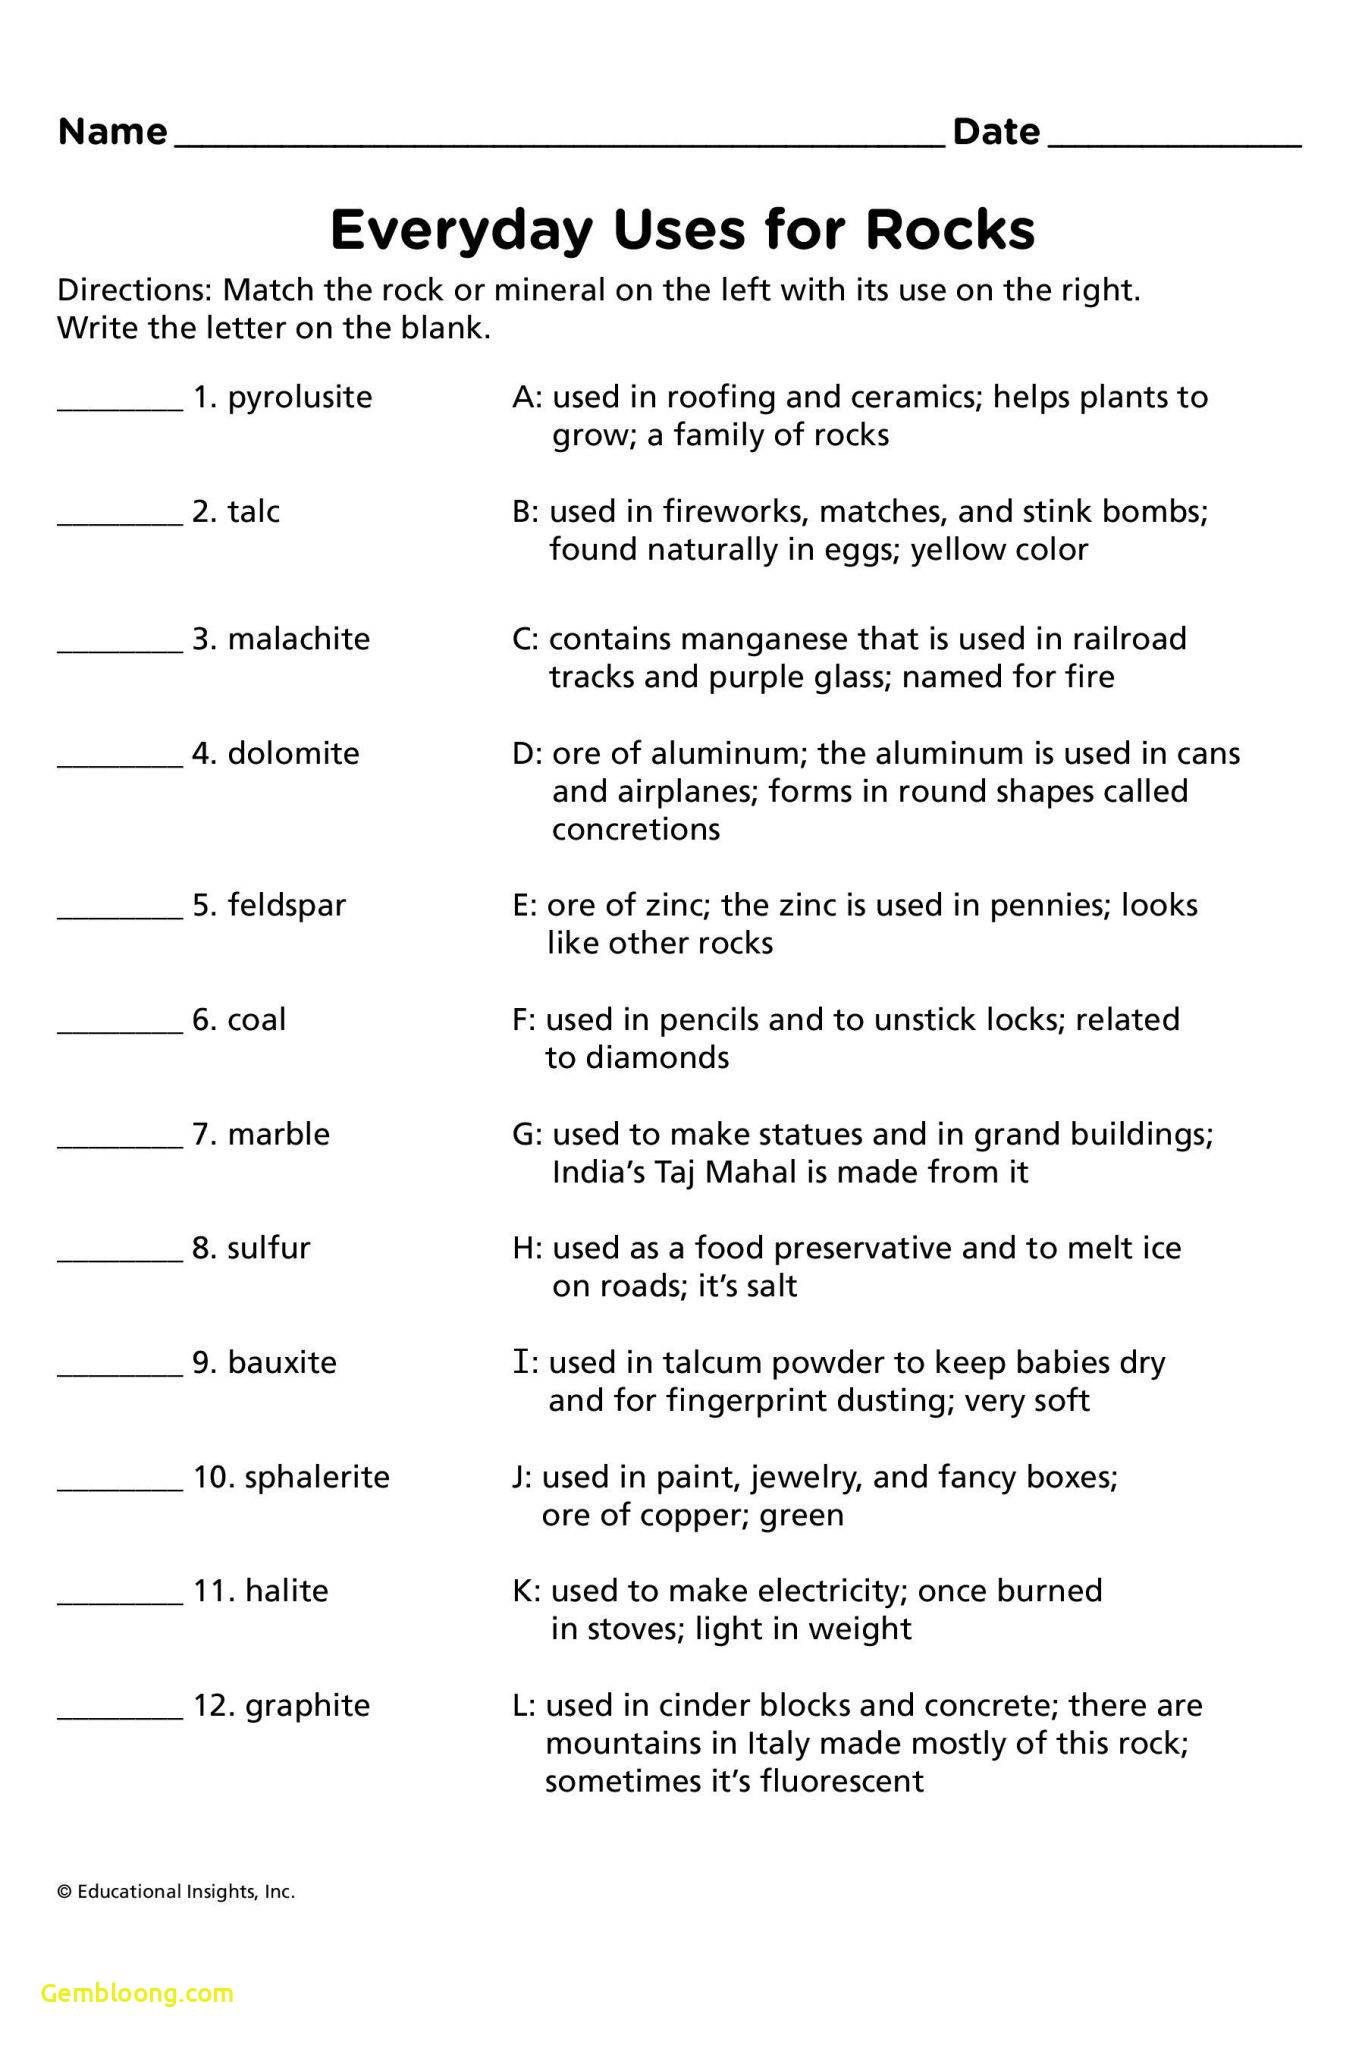 Connotation And Denotation Worksheets  Cramerforcongress Pertaining To Connotation And Denotation Worksheets For Middle School